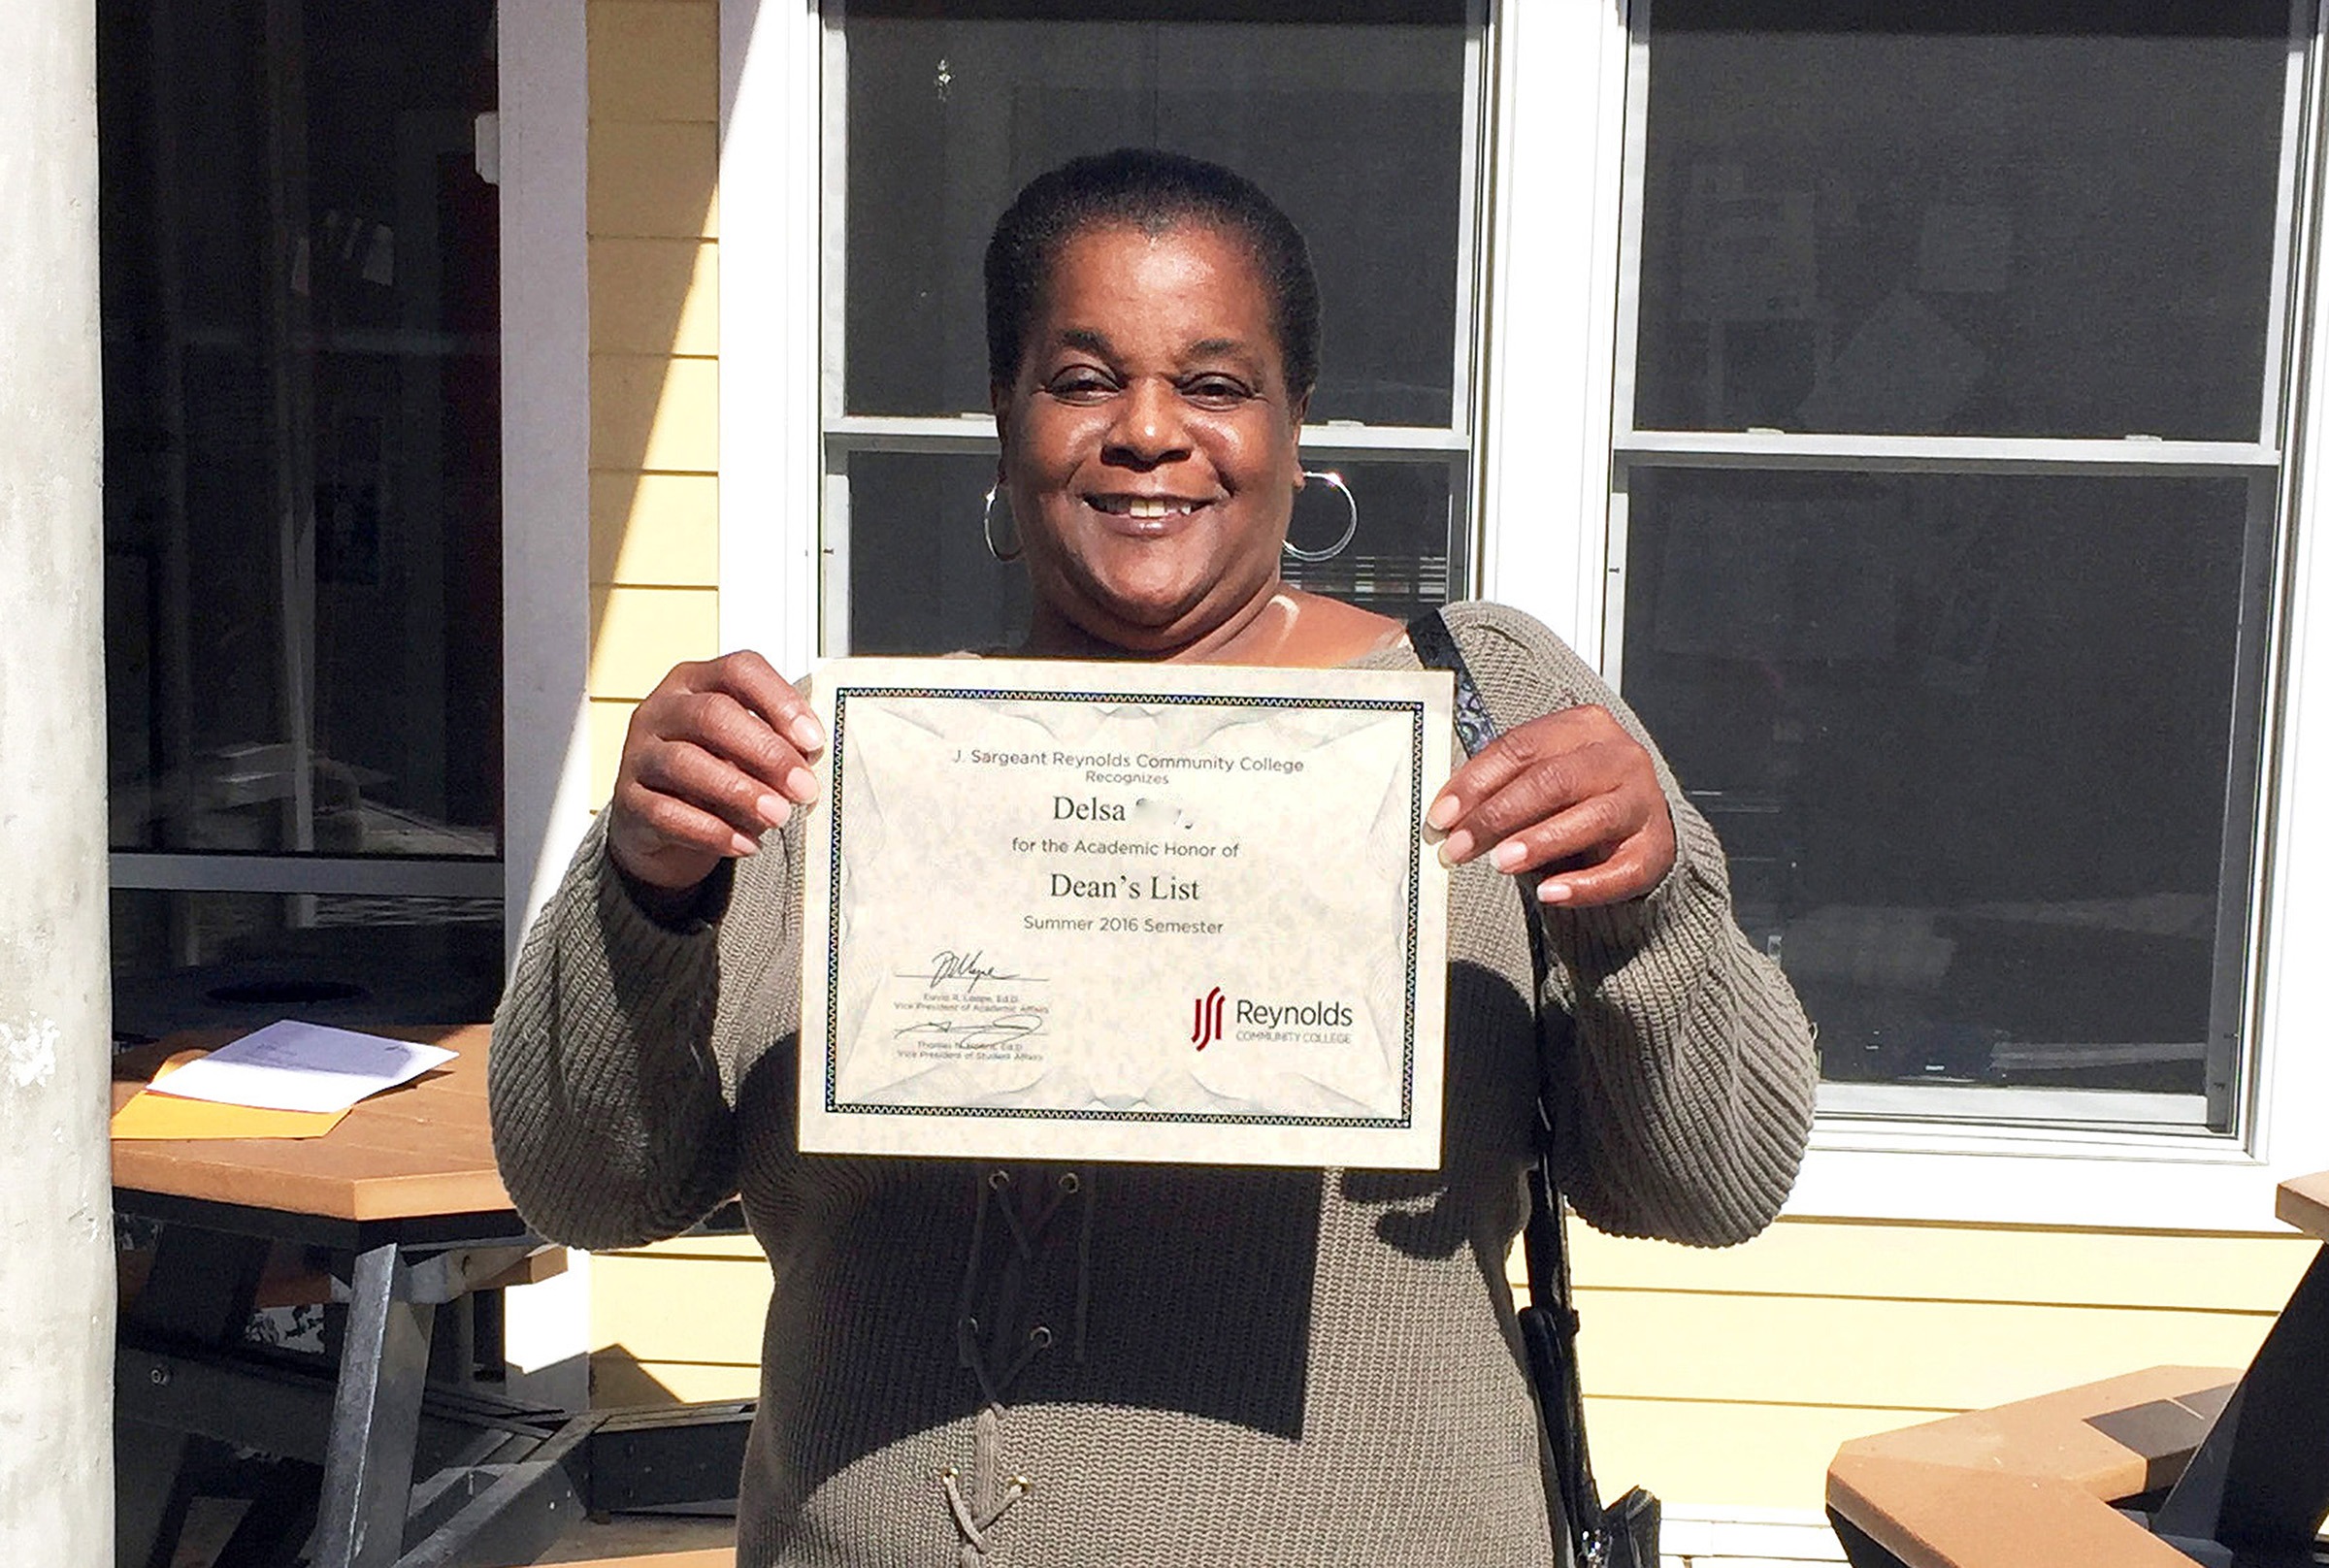 Image of Delsa, an African-American woman, smiling and holding up her Dean's List certificate from Reynolds Community College